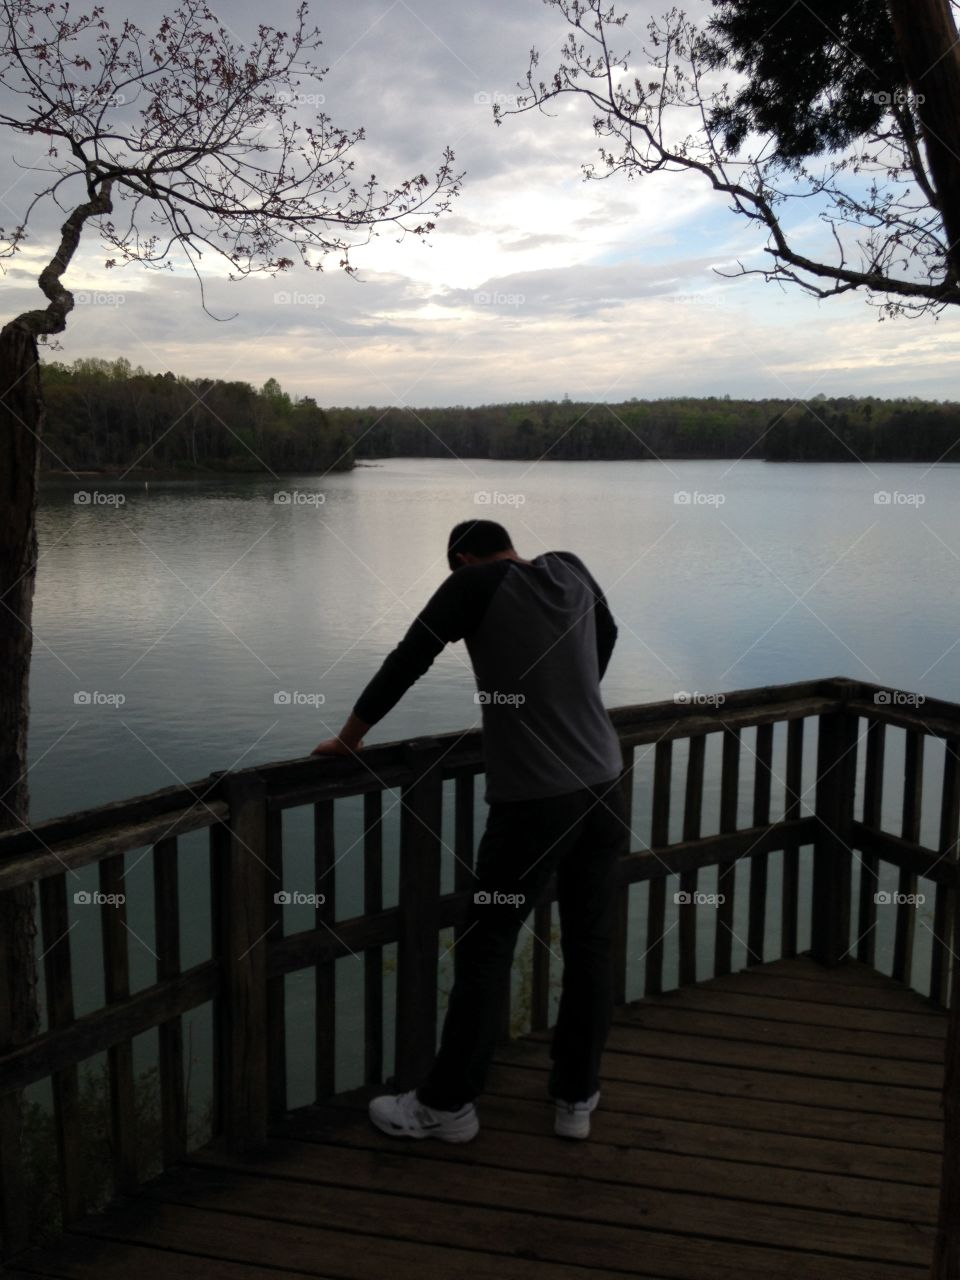 Contemplation on the lake